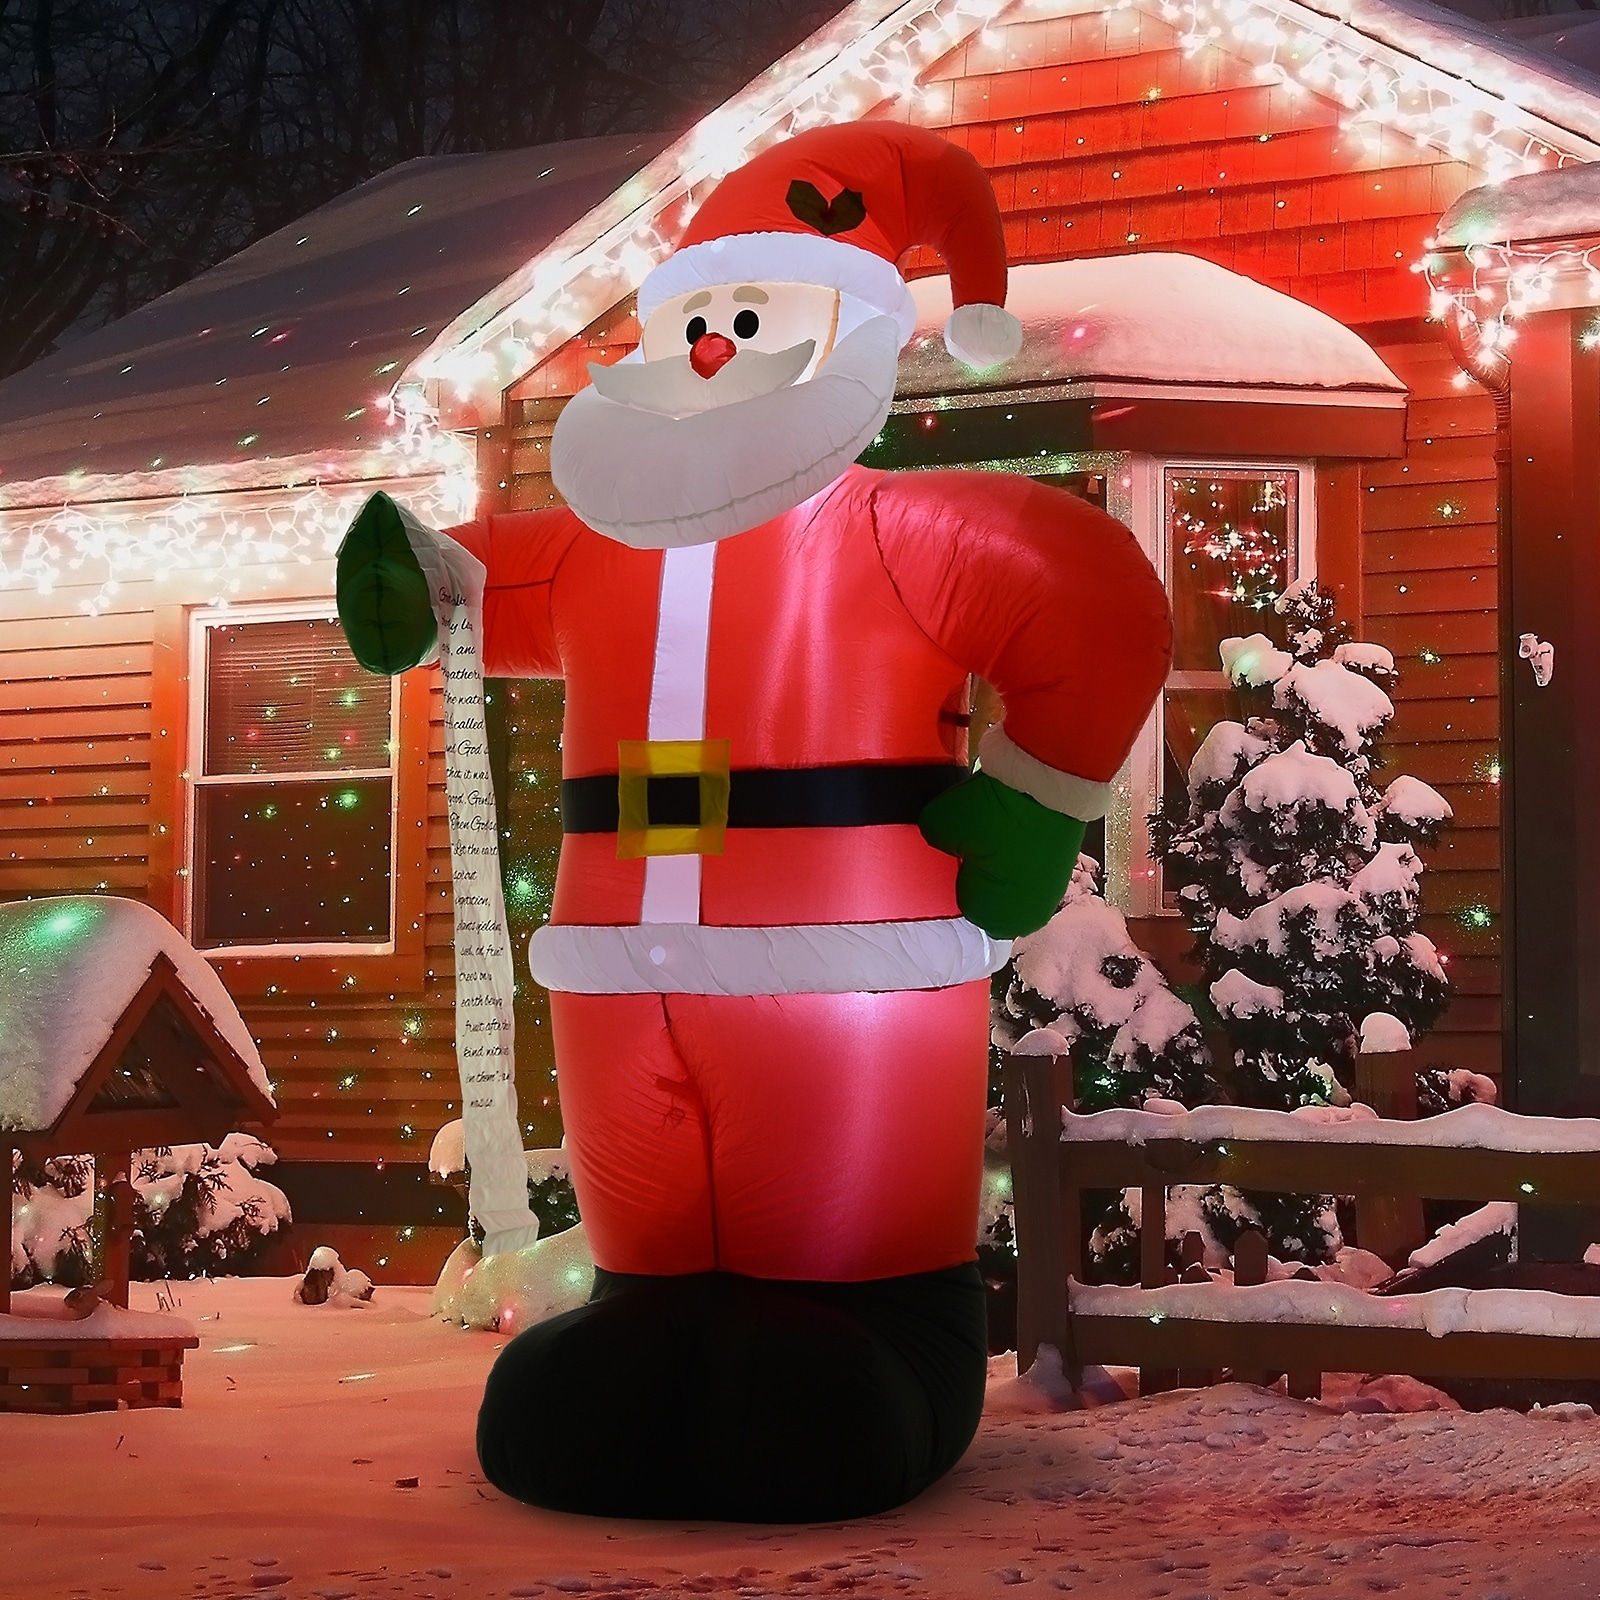 Decor for Yard Party Garden Patio New Year Albrillo Christmas Inflatables Santa Clause 8 Foot Blow Up Christmas Decorations Outdoor with LED Lights Renewed